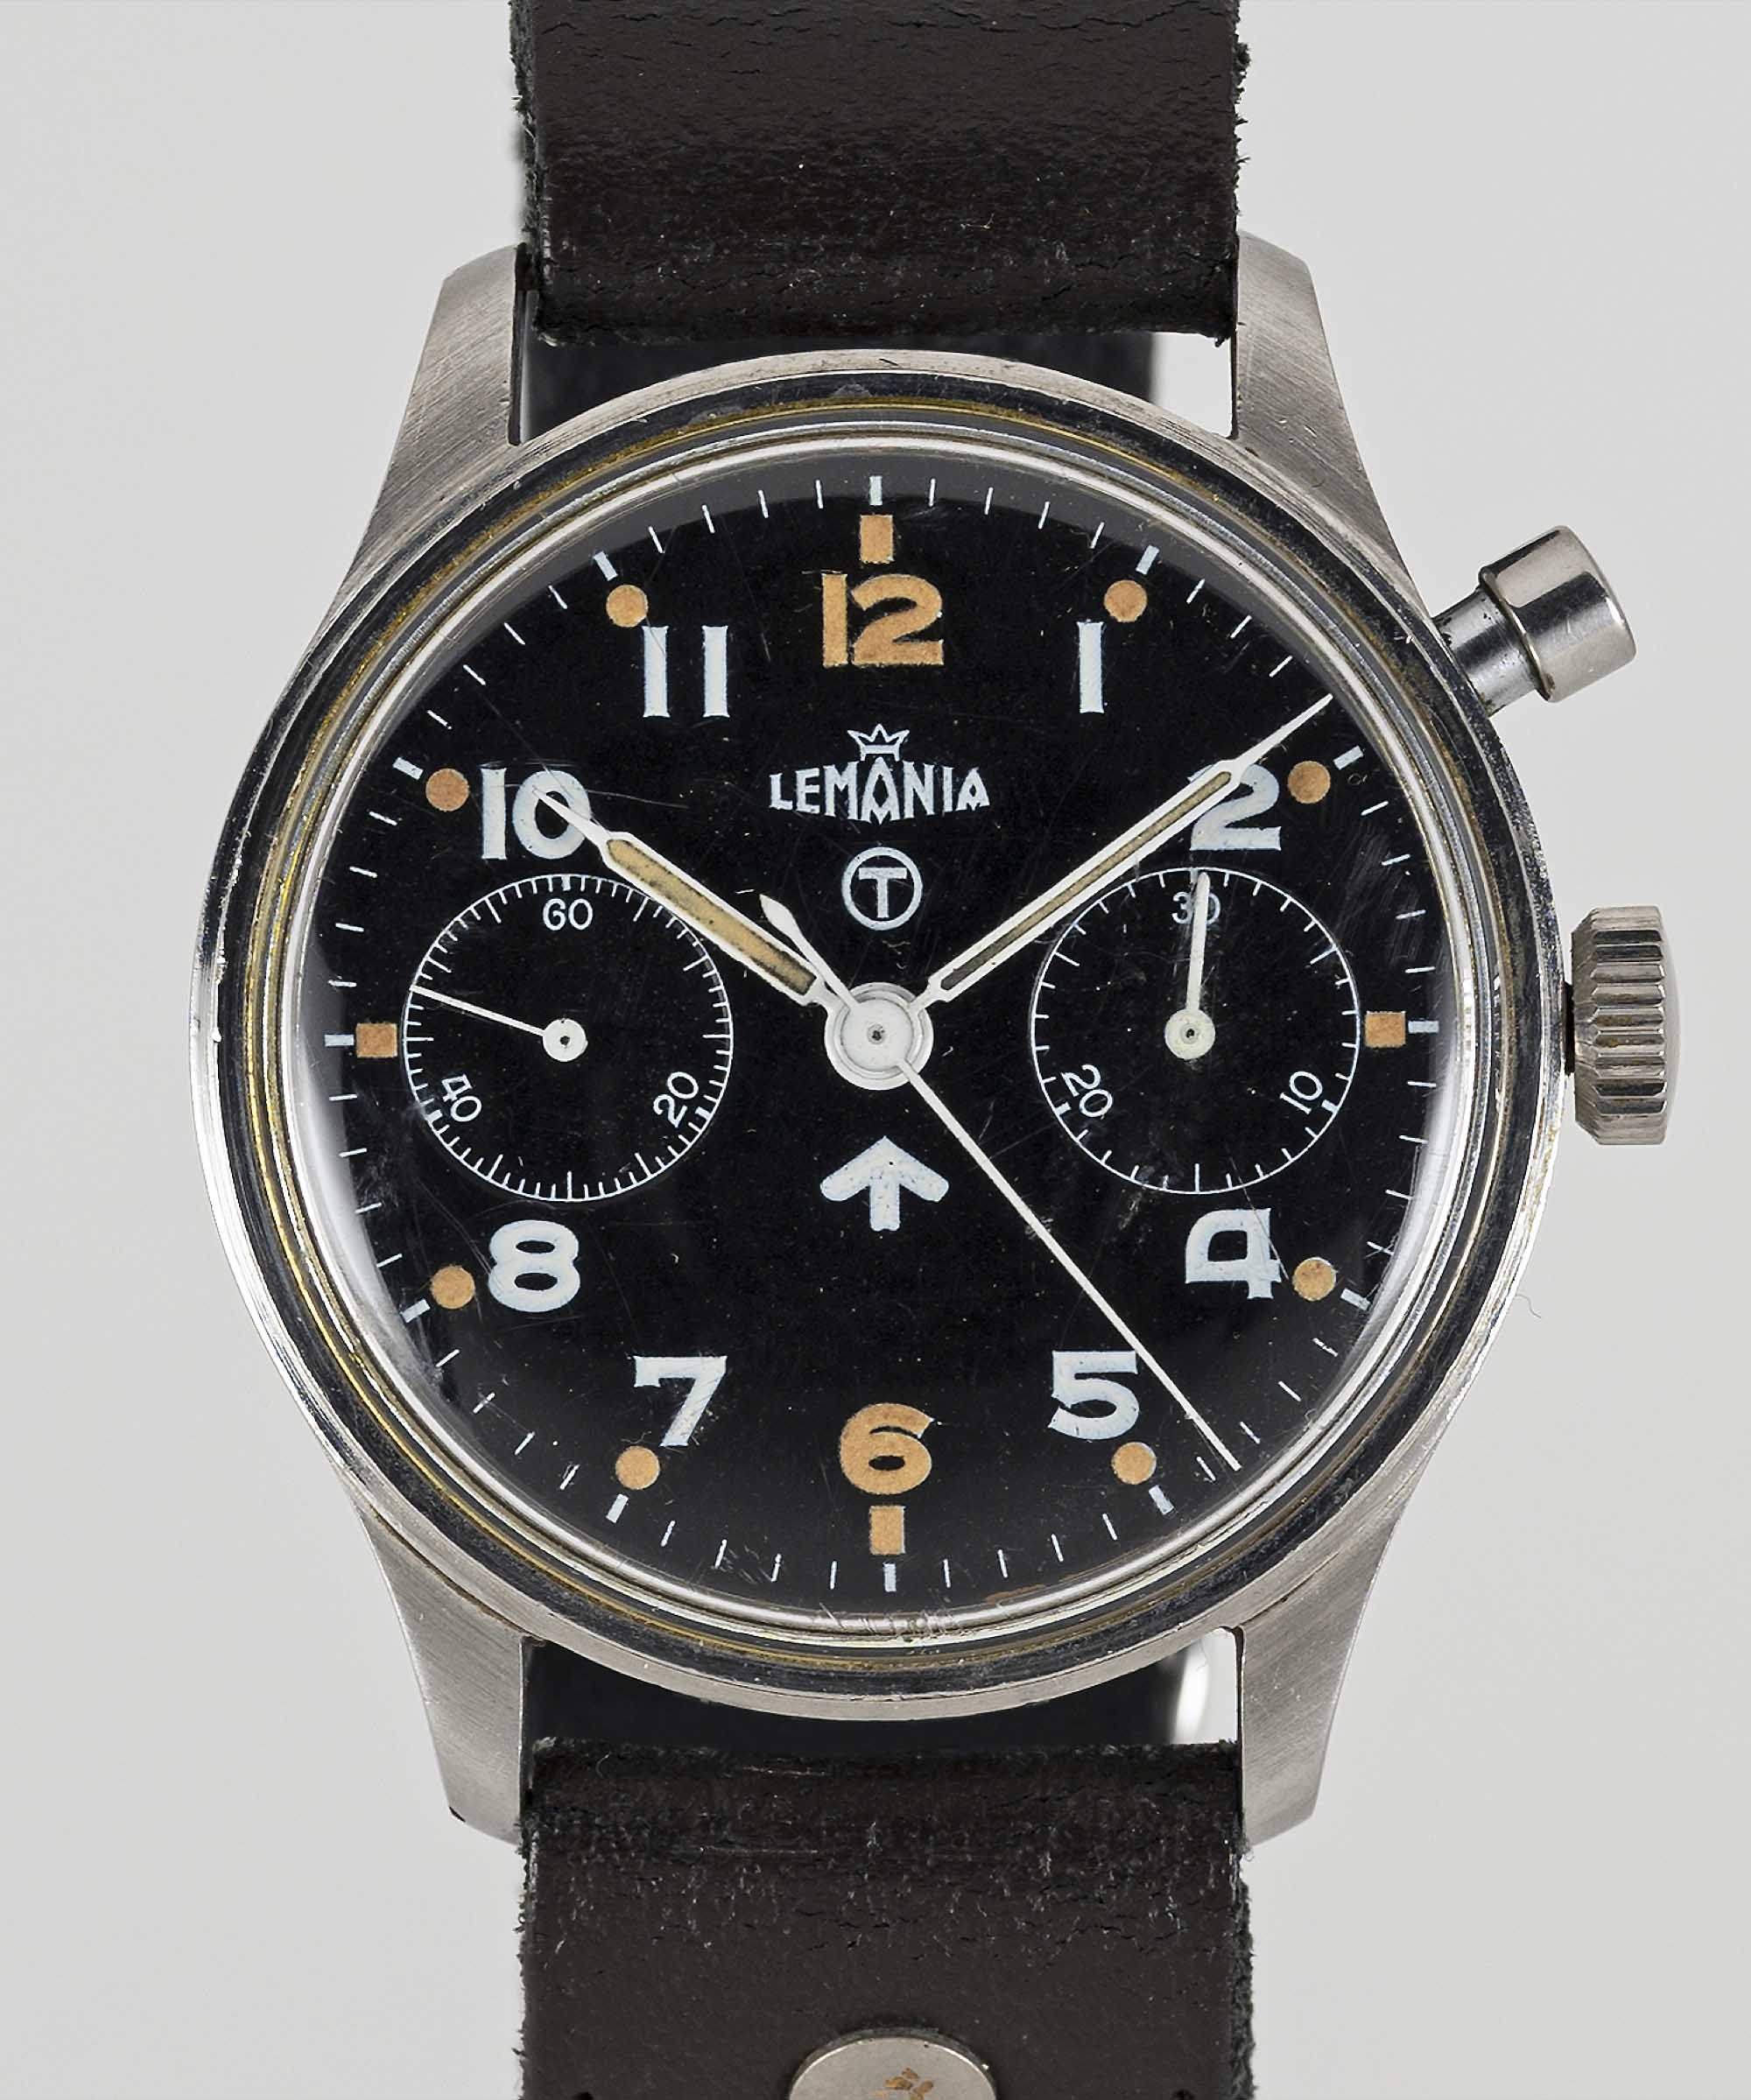 A GENTLEMAN'S STAINLESS STEEL BRITISH MILITARY ROYAL NAVY LEMANIA SINGLE BUTTON CHRONOGRAPH WRIST